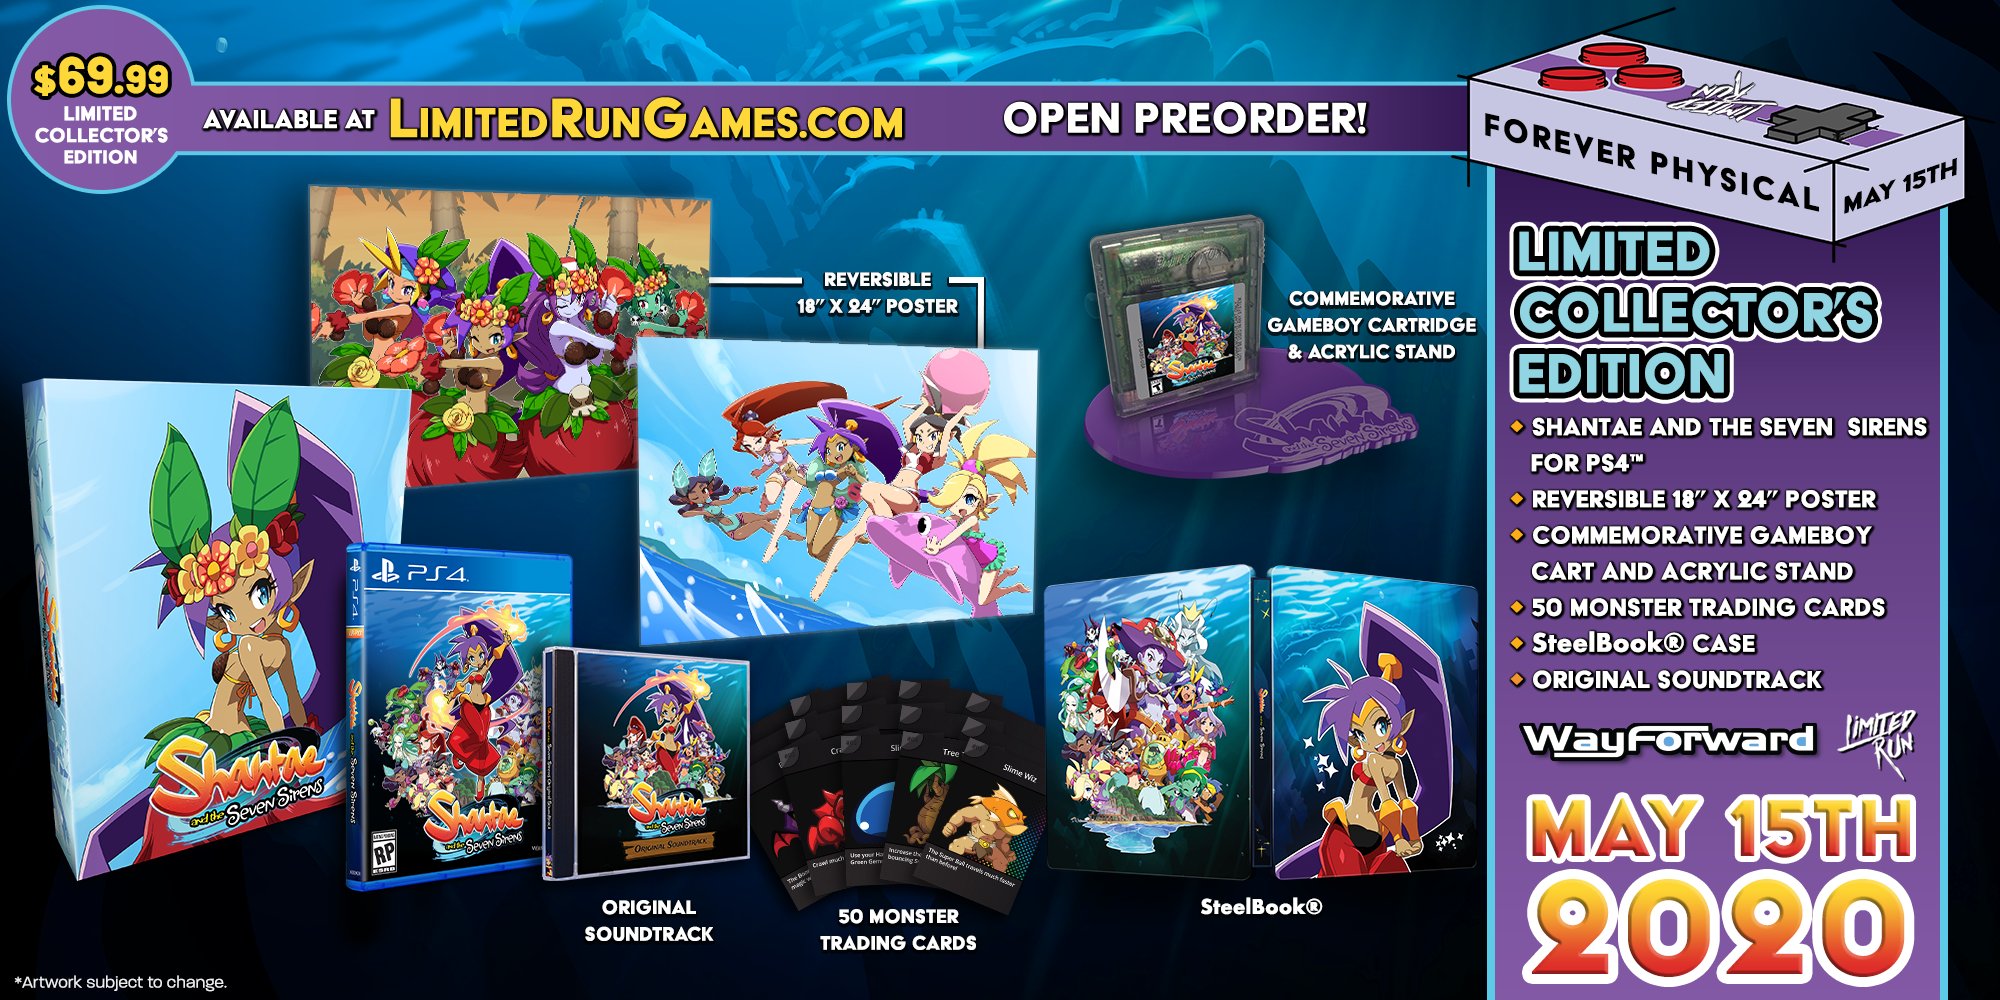 Limited Run Games - Shantae and the Seven Sirens physical editions available for pre-order